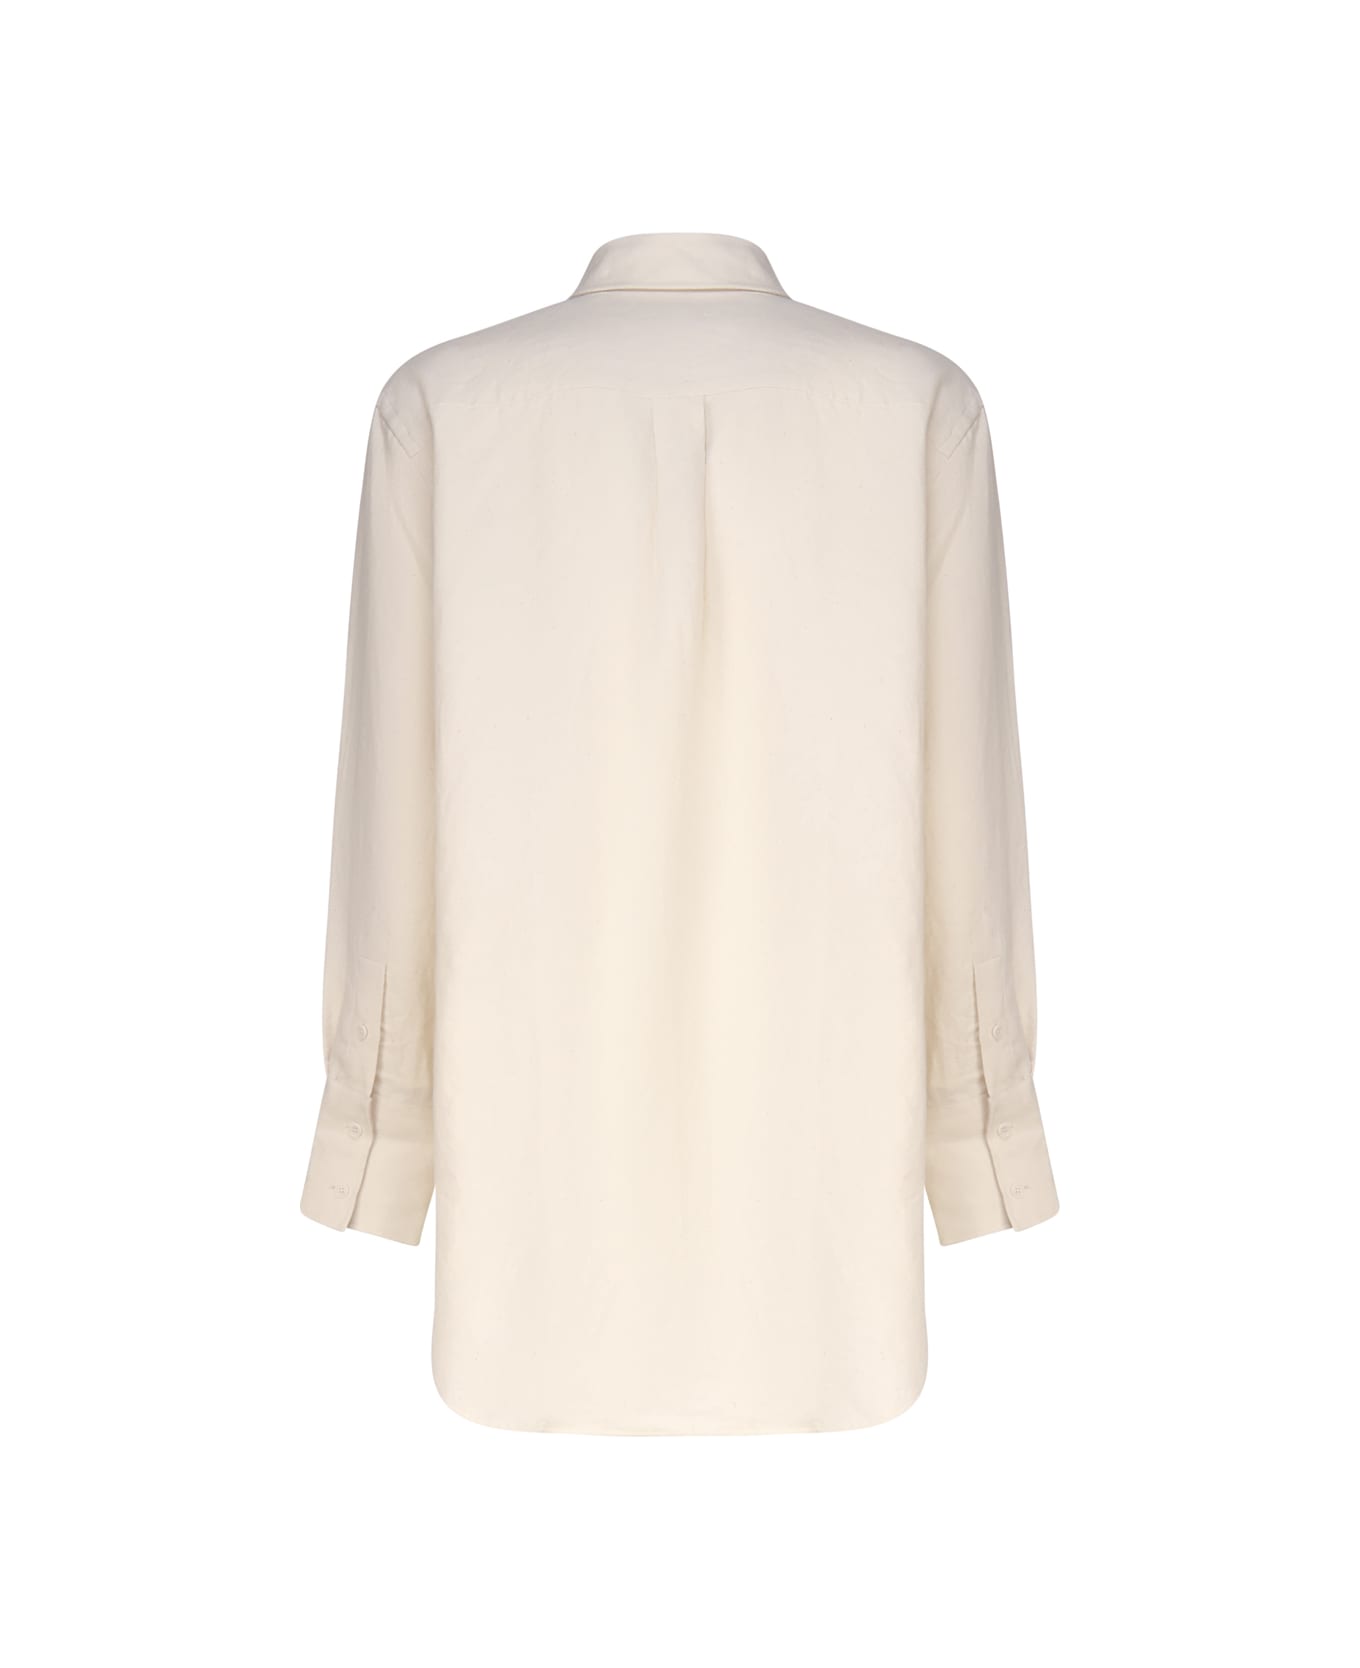 J.W. Anderson Shirt With Anchor Embroidery - Ivory シャツ